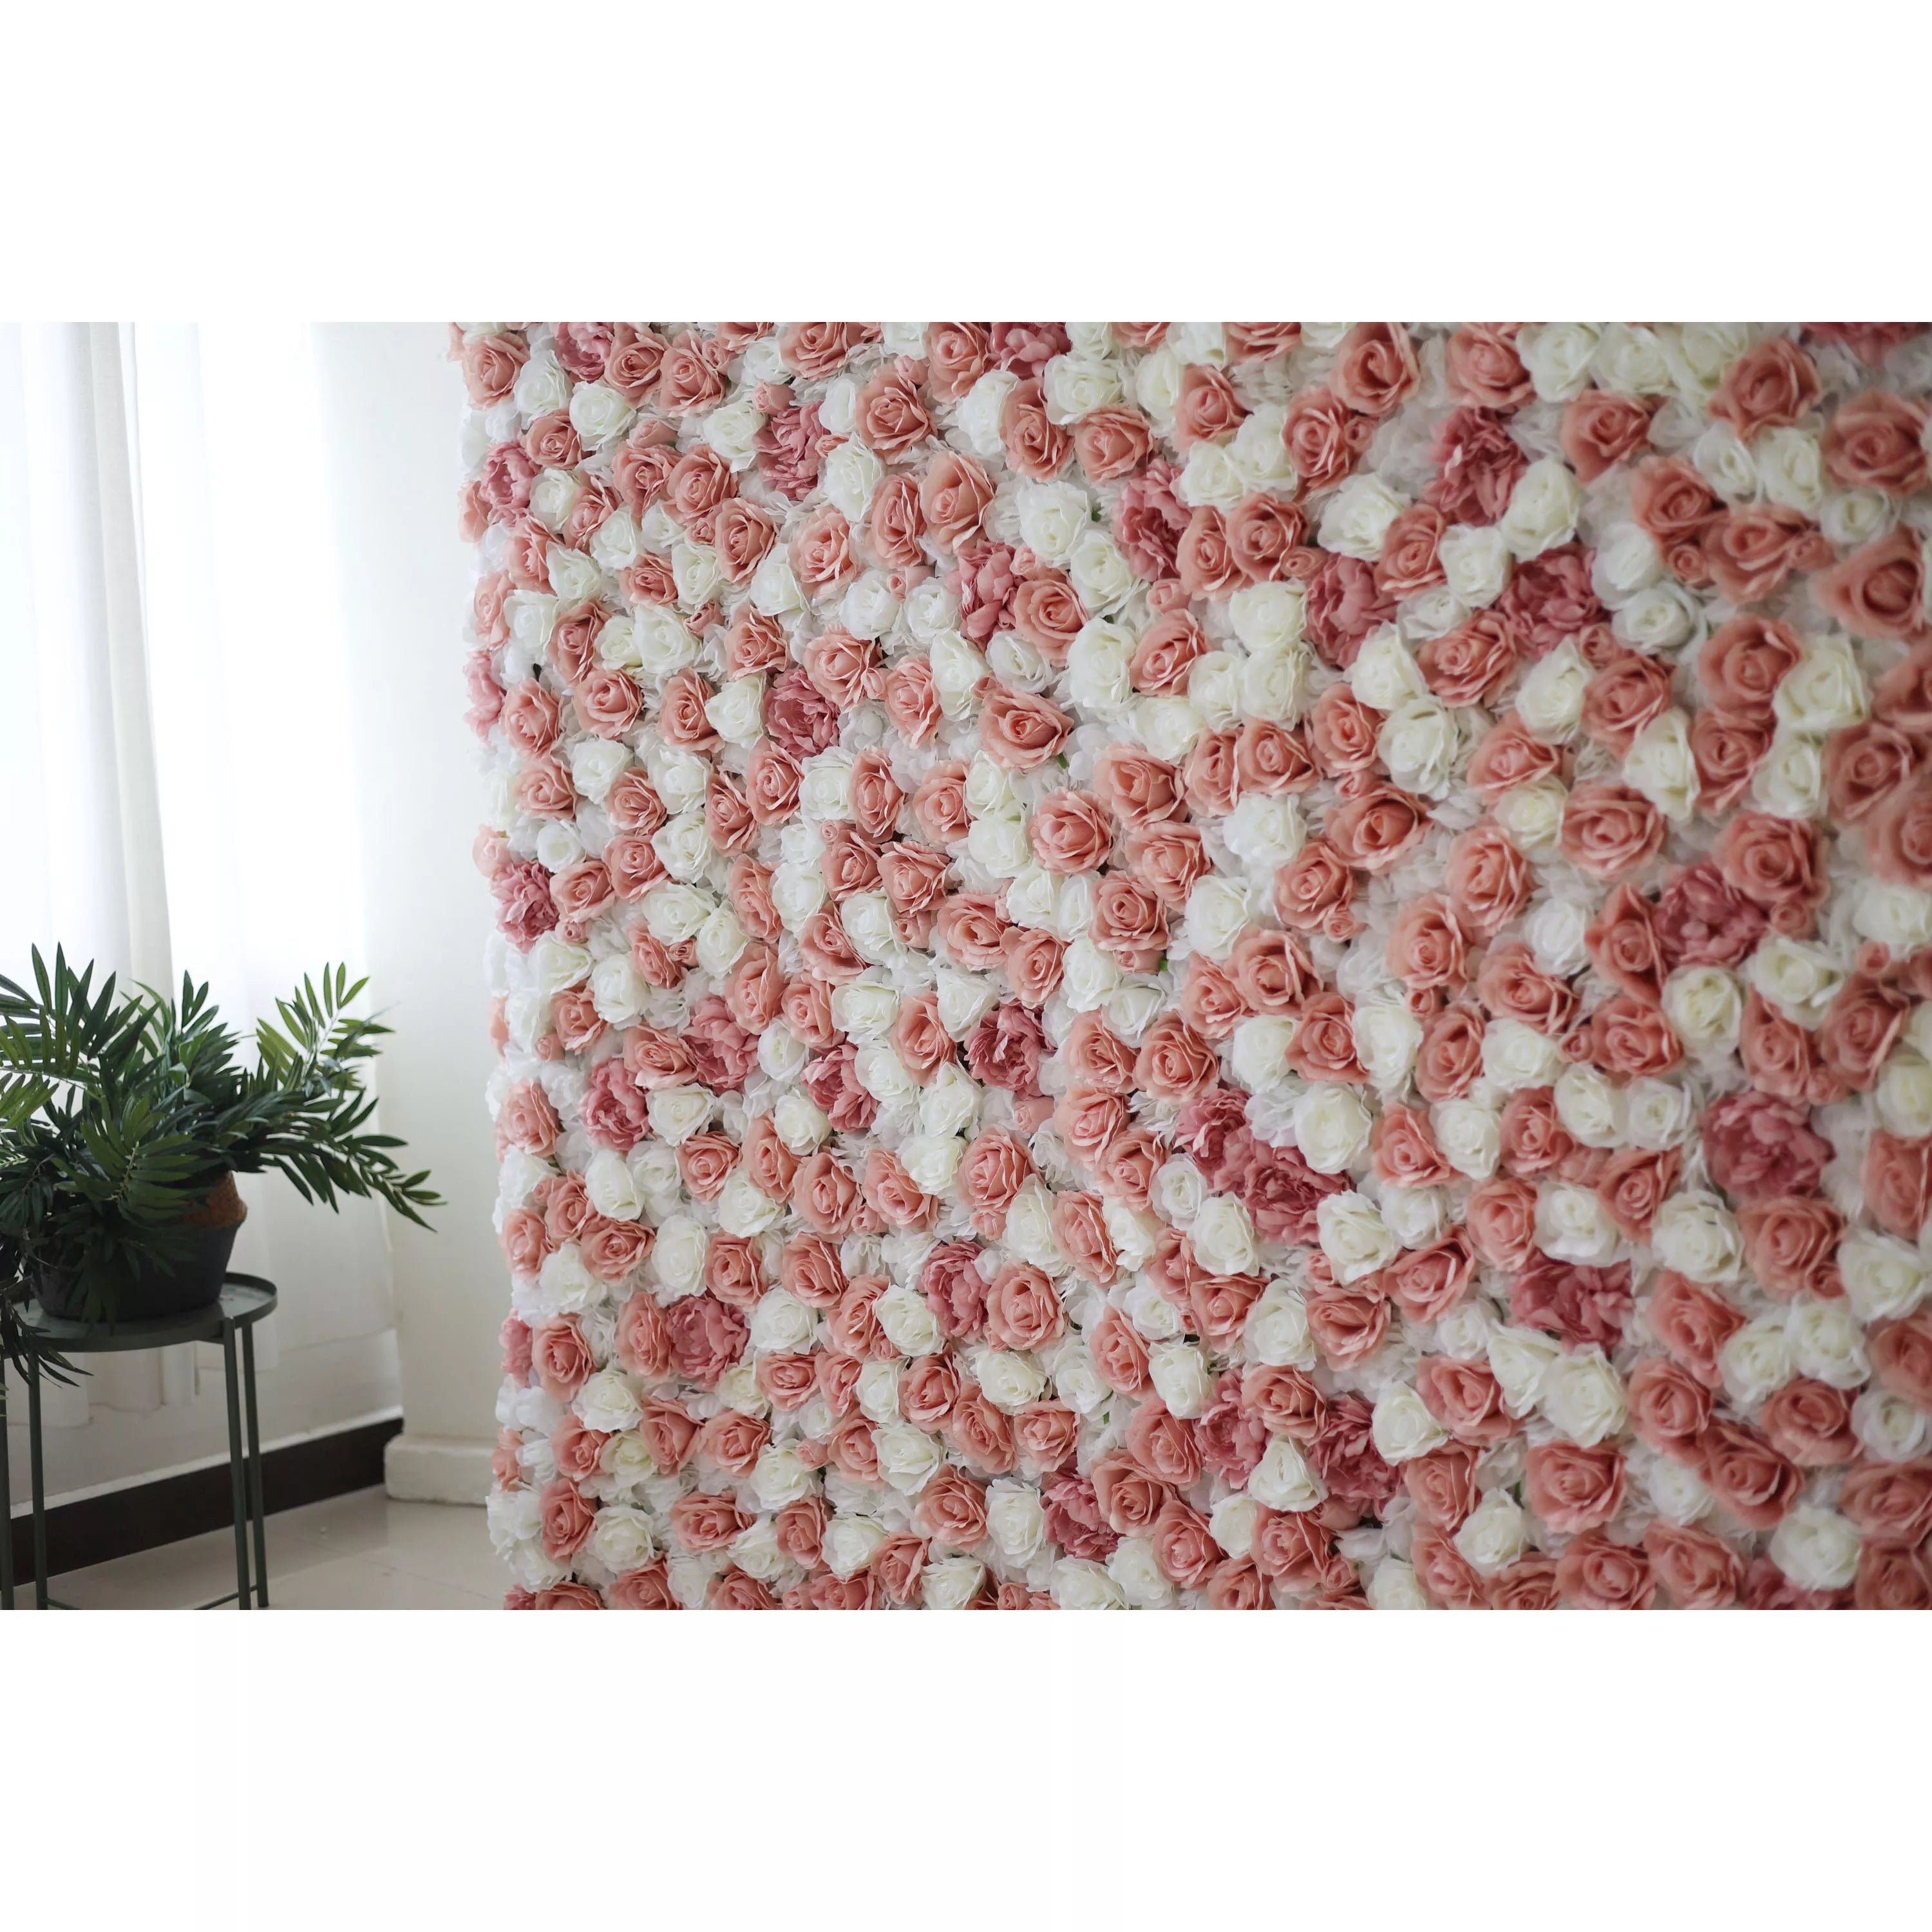 ValarFlowers Artificial Floral Wall Backdrop: Rosy Radiance - A Delicate Dance of Pink and White Roses-VF-277